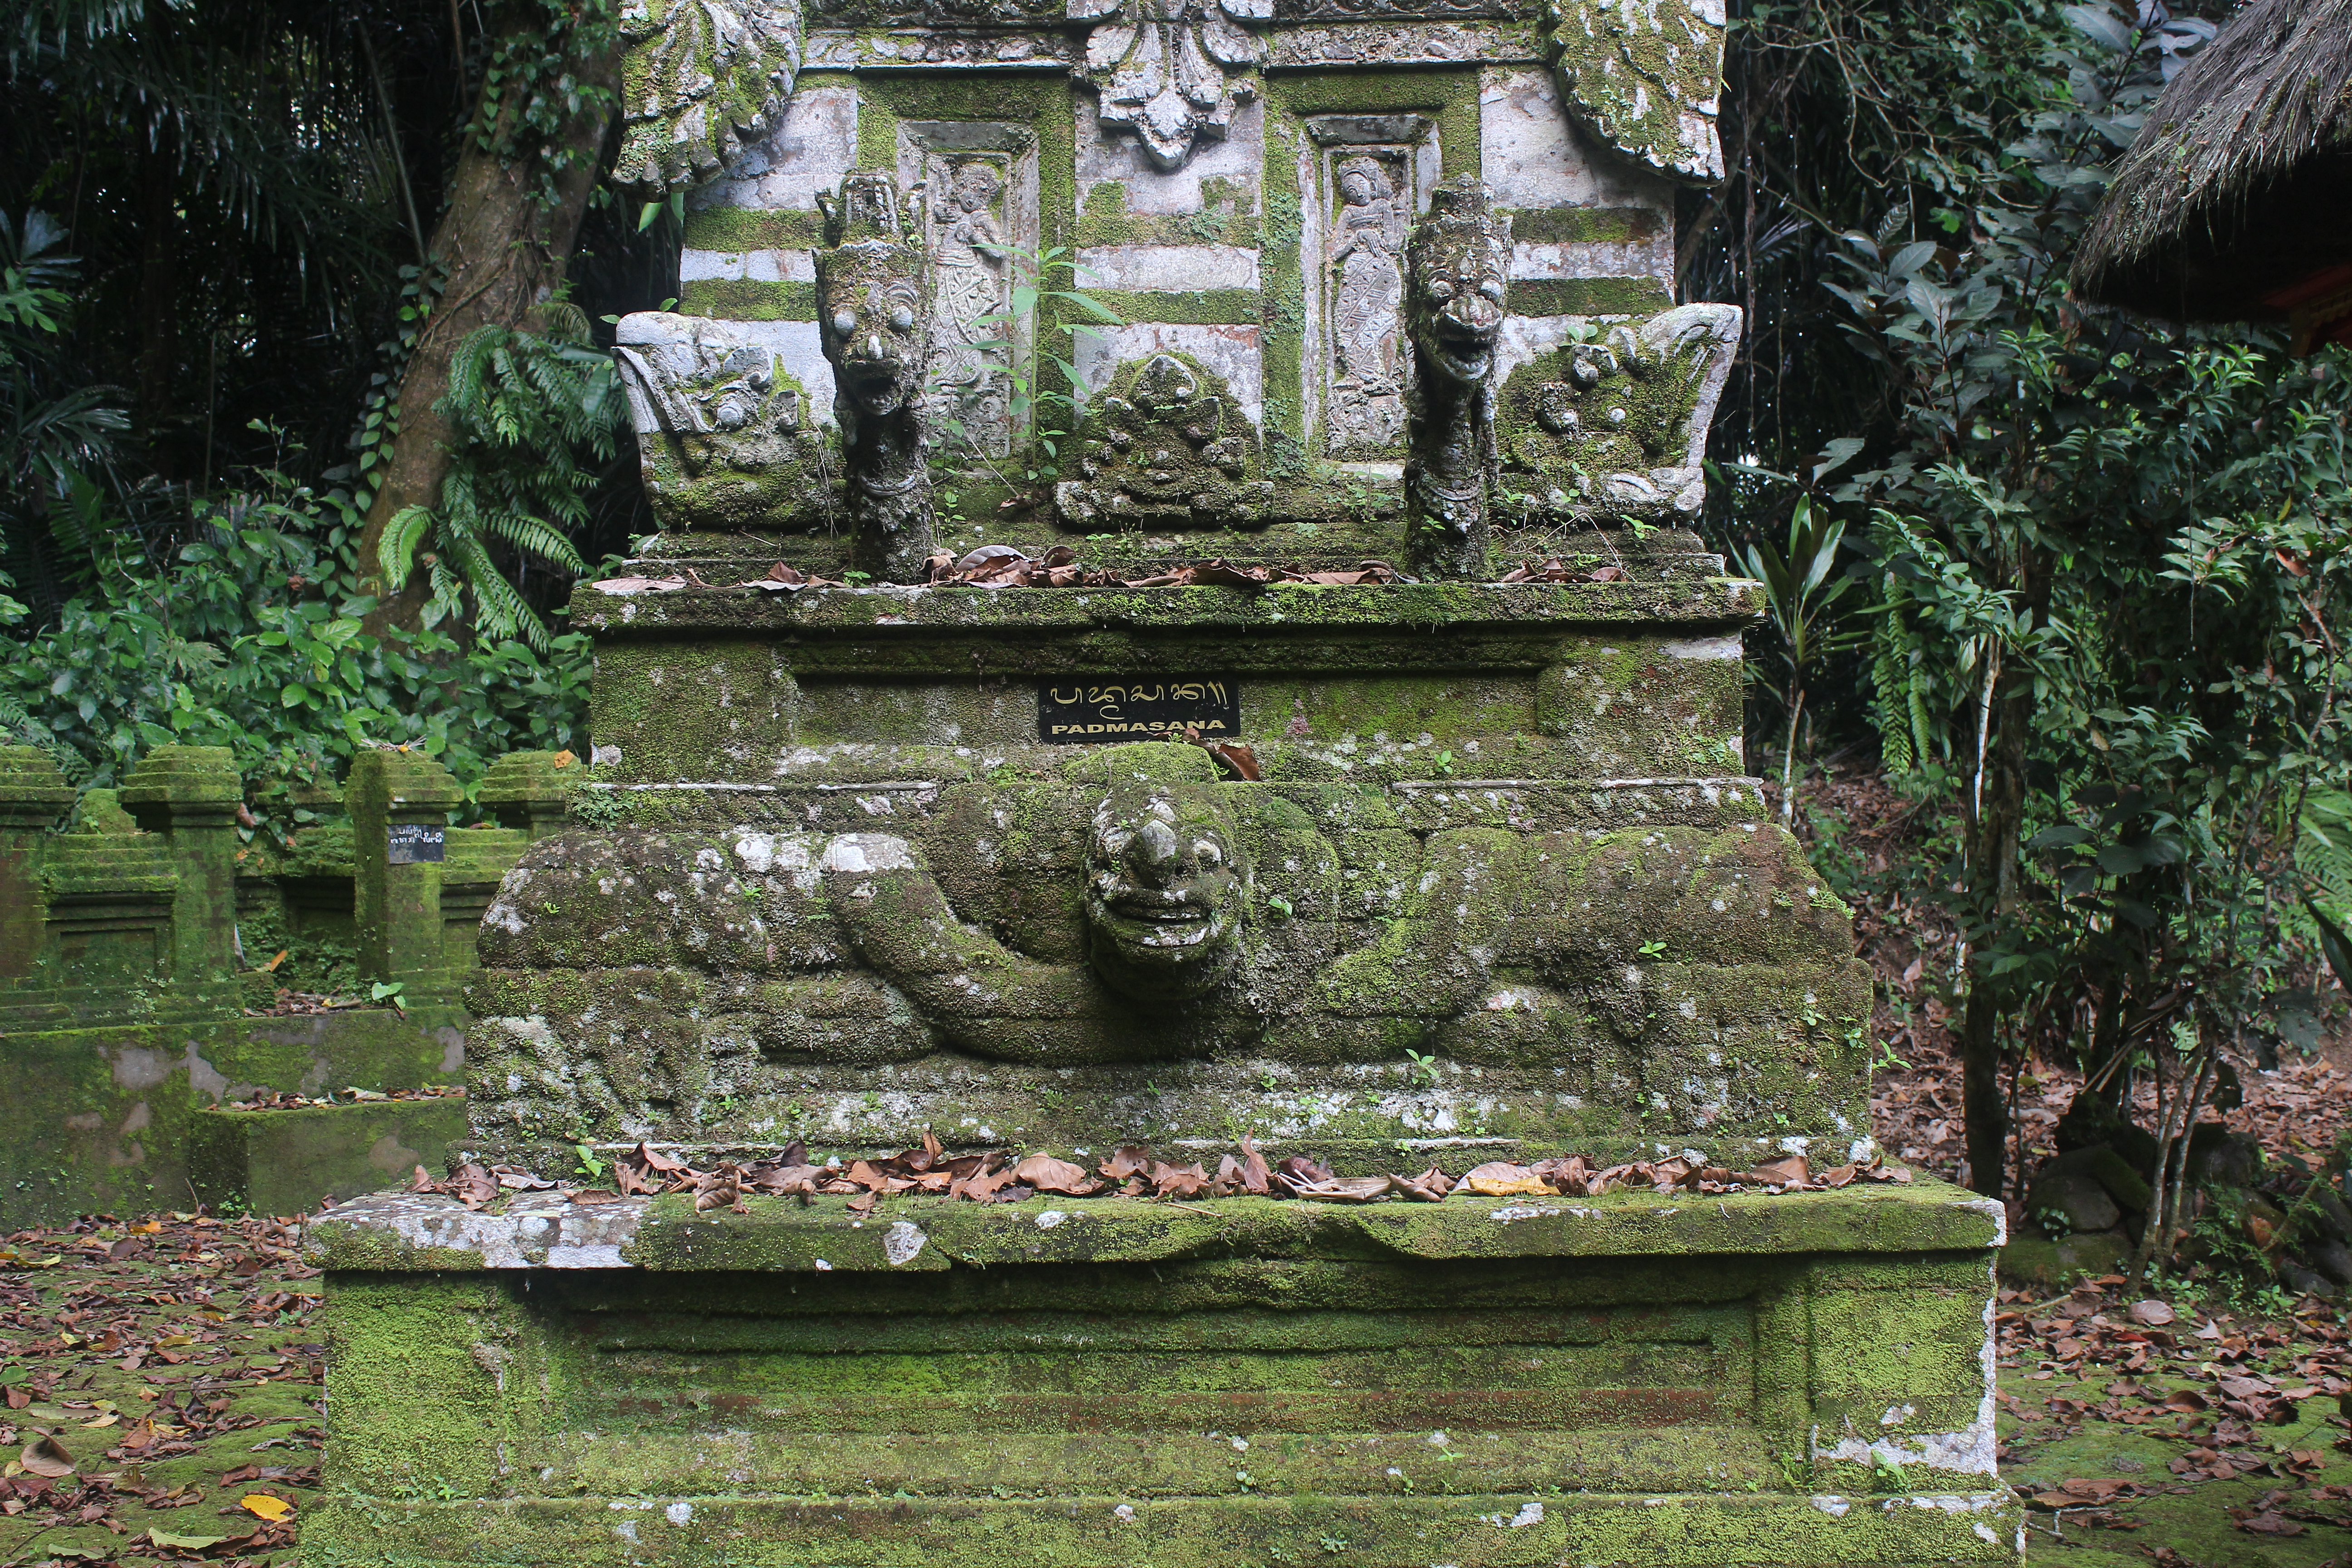 Overgrown shrine with serpent carvings